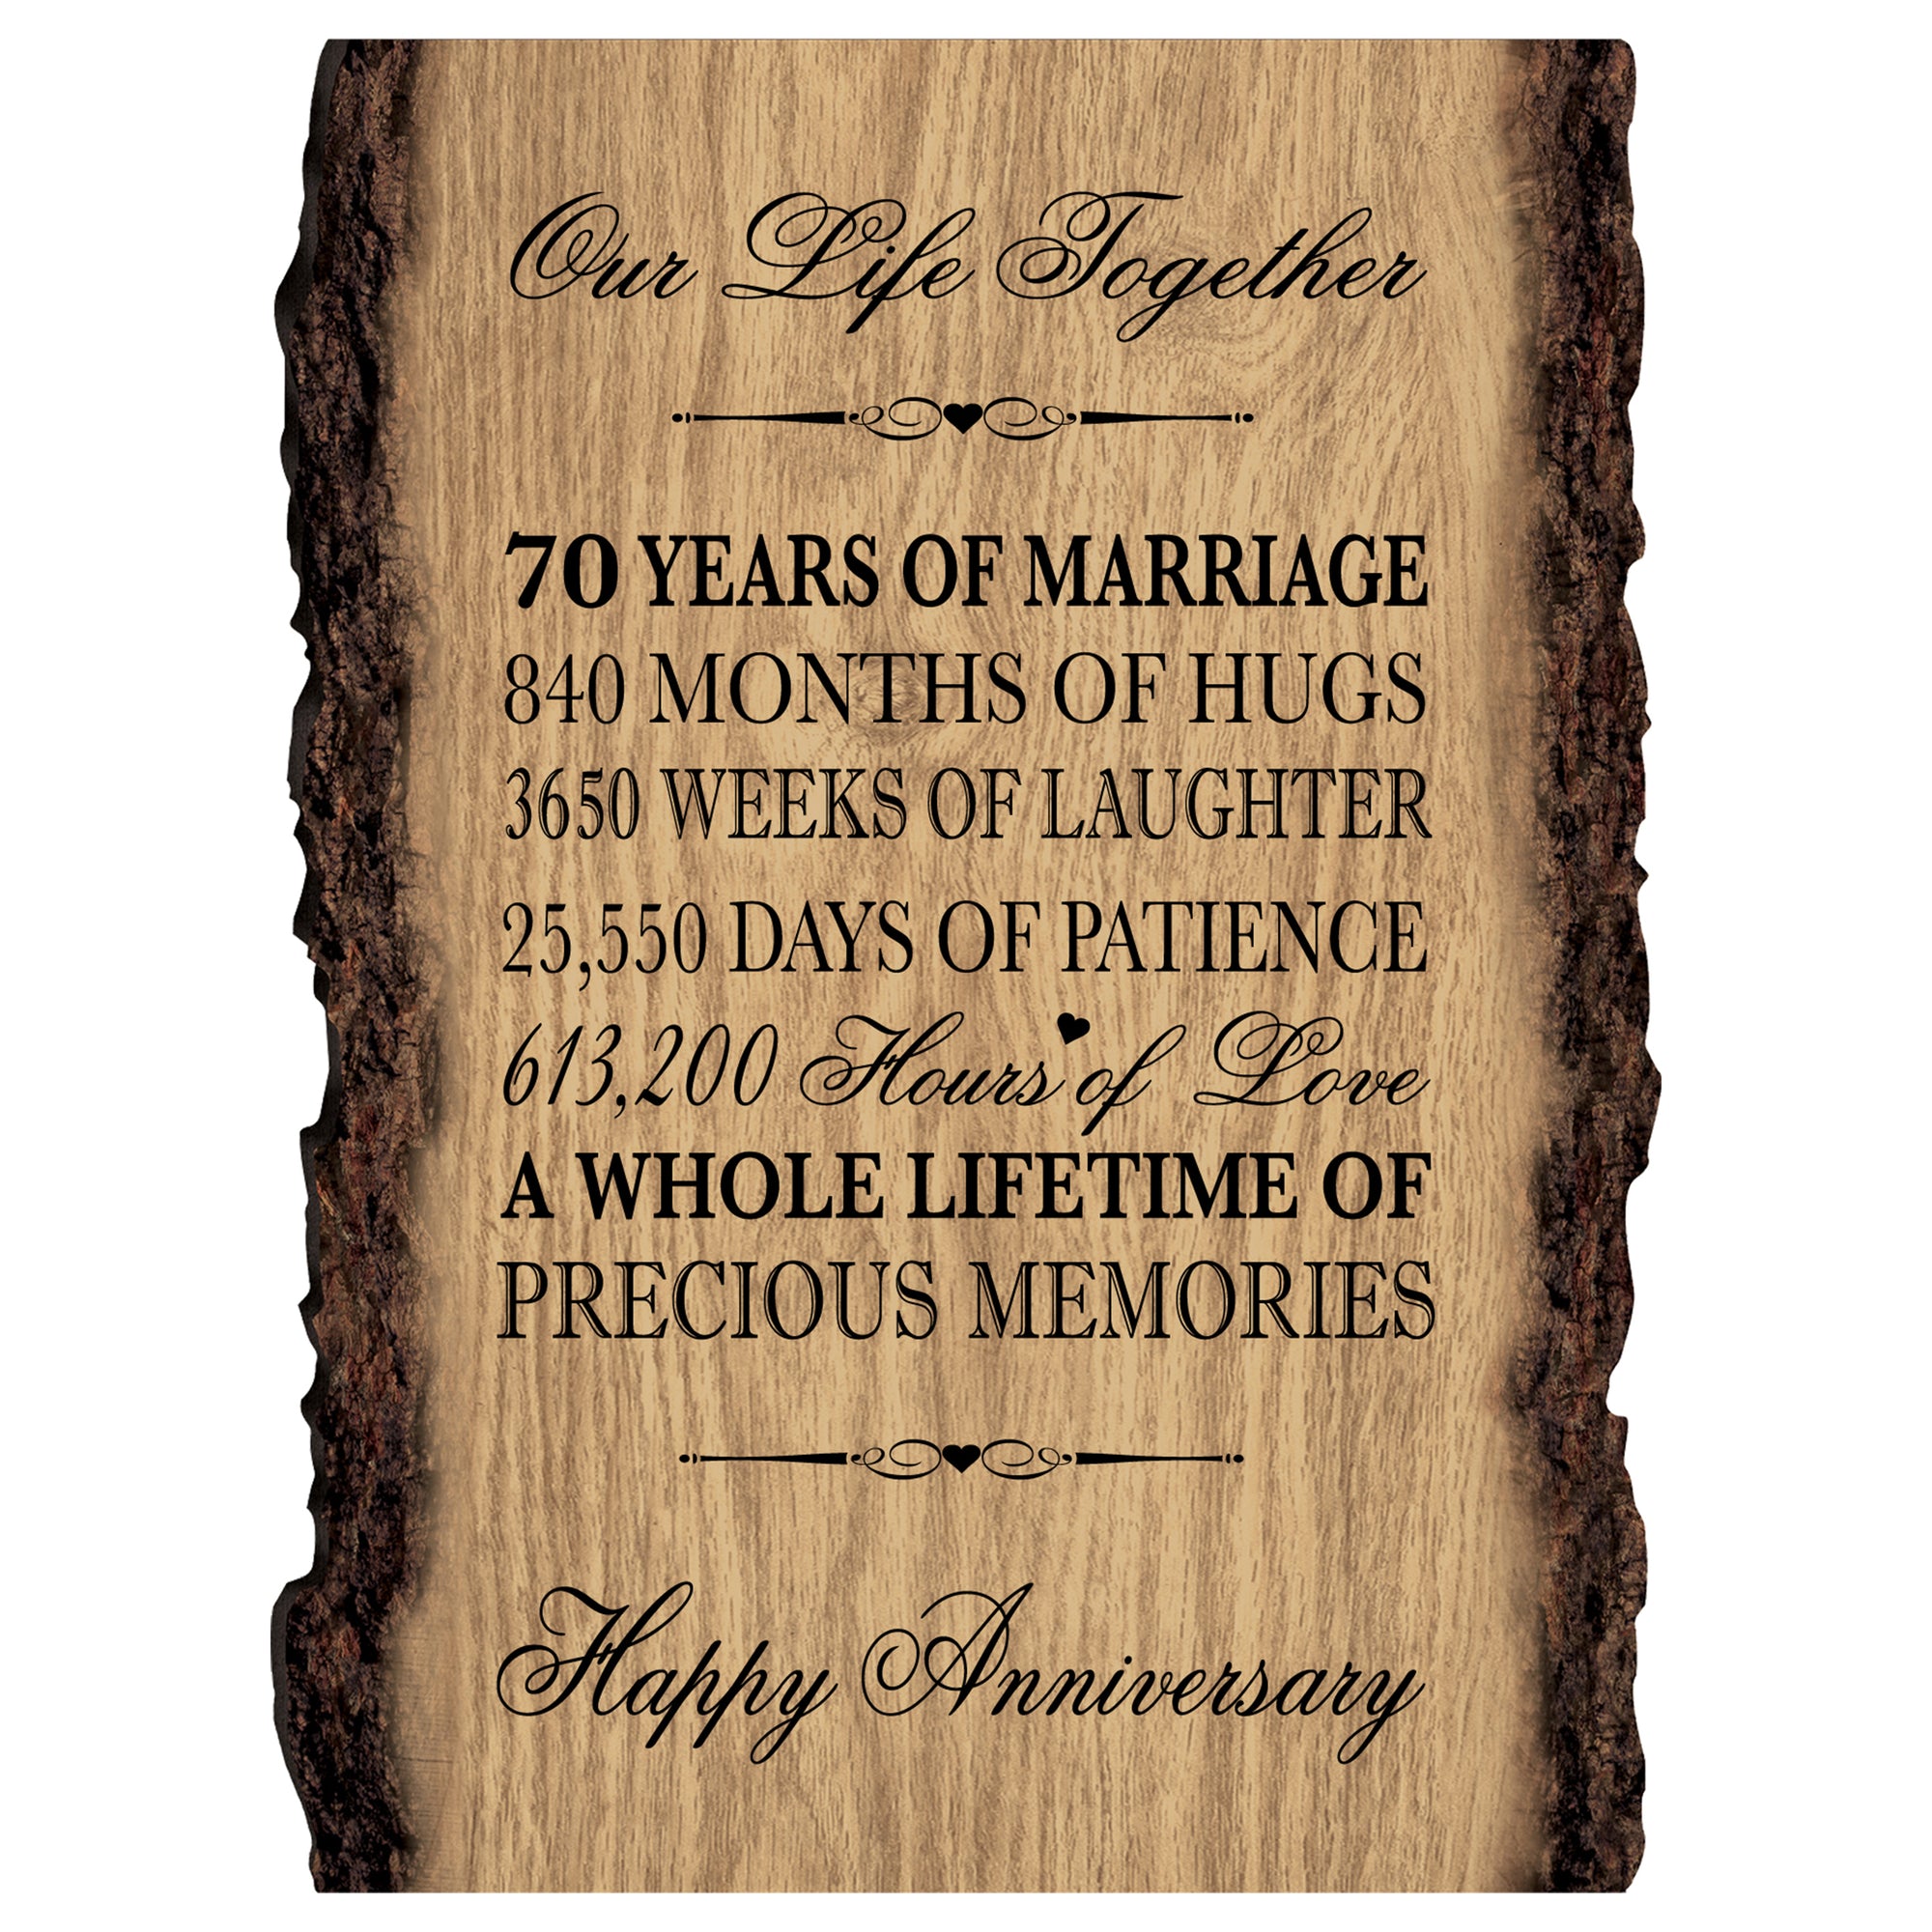 Rustic Wedding Anniversary 9x12 Barky Wall Plaque Gift For Parents, Grandparents New Couple - 70 Years Of Marriage